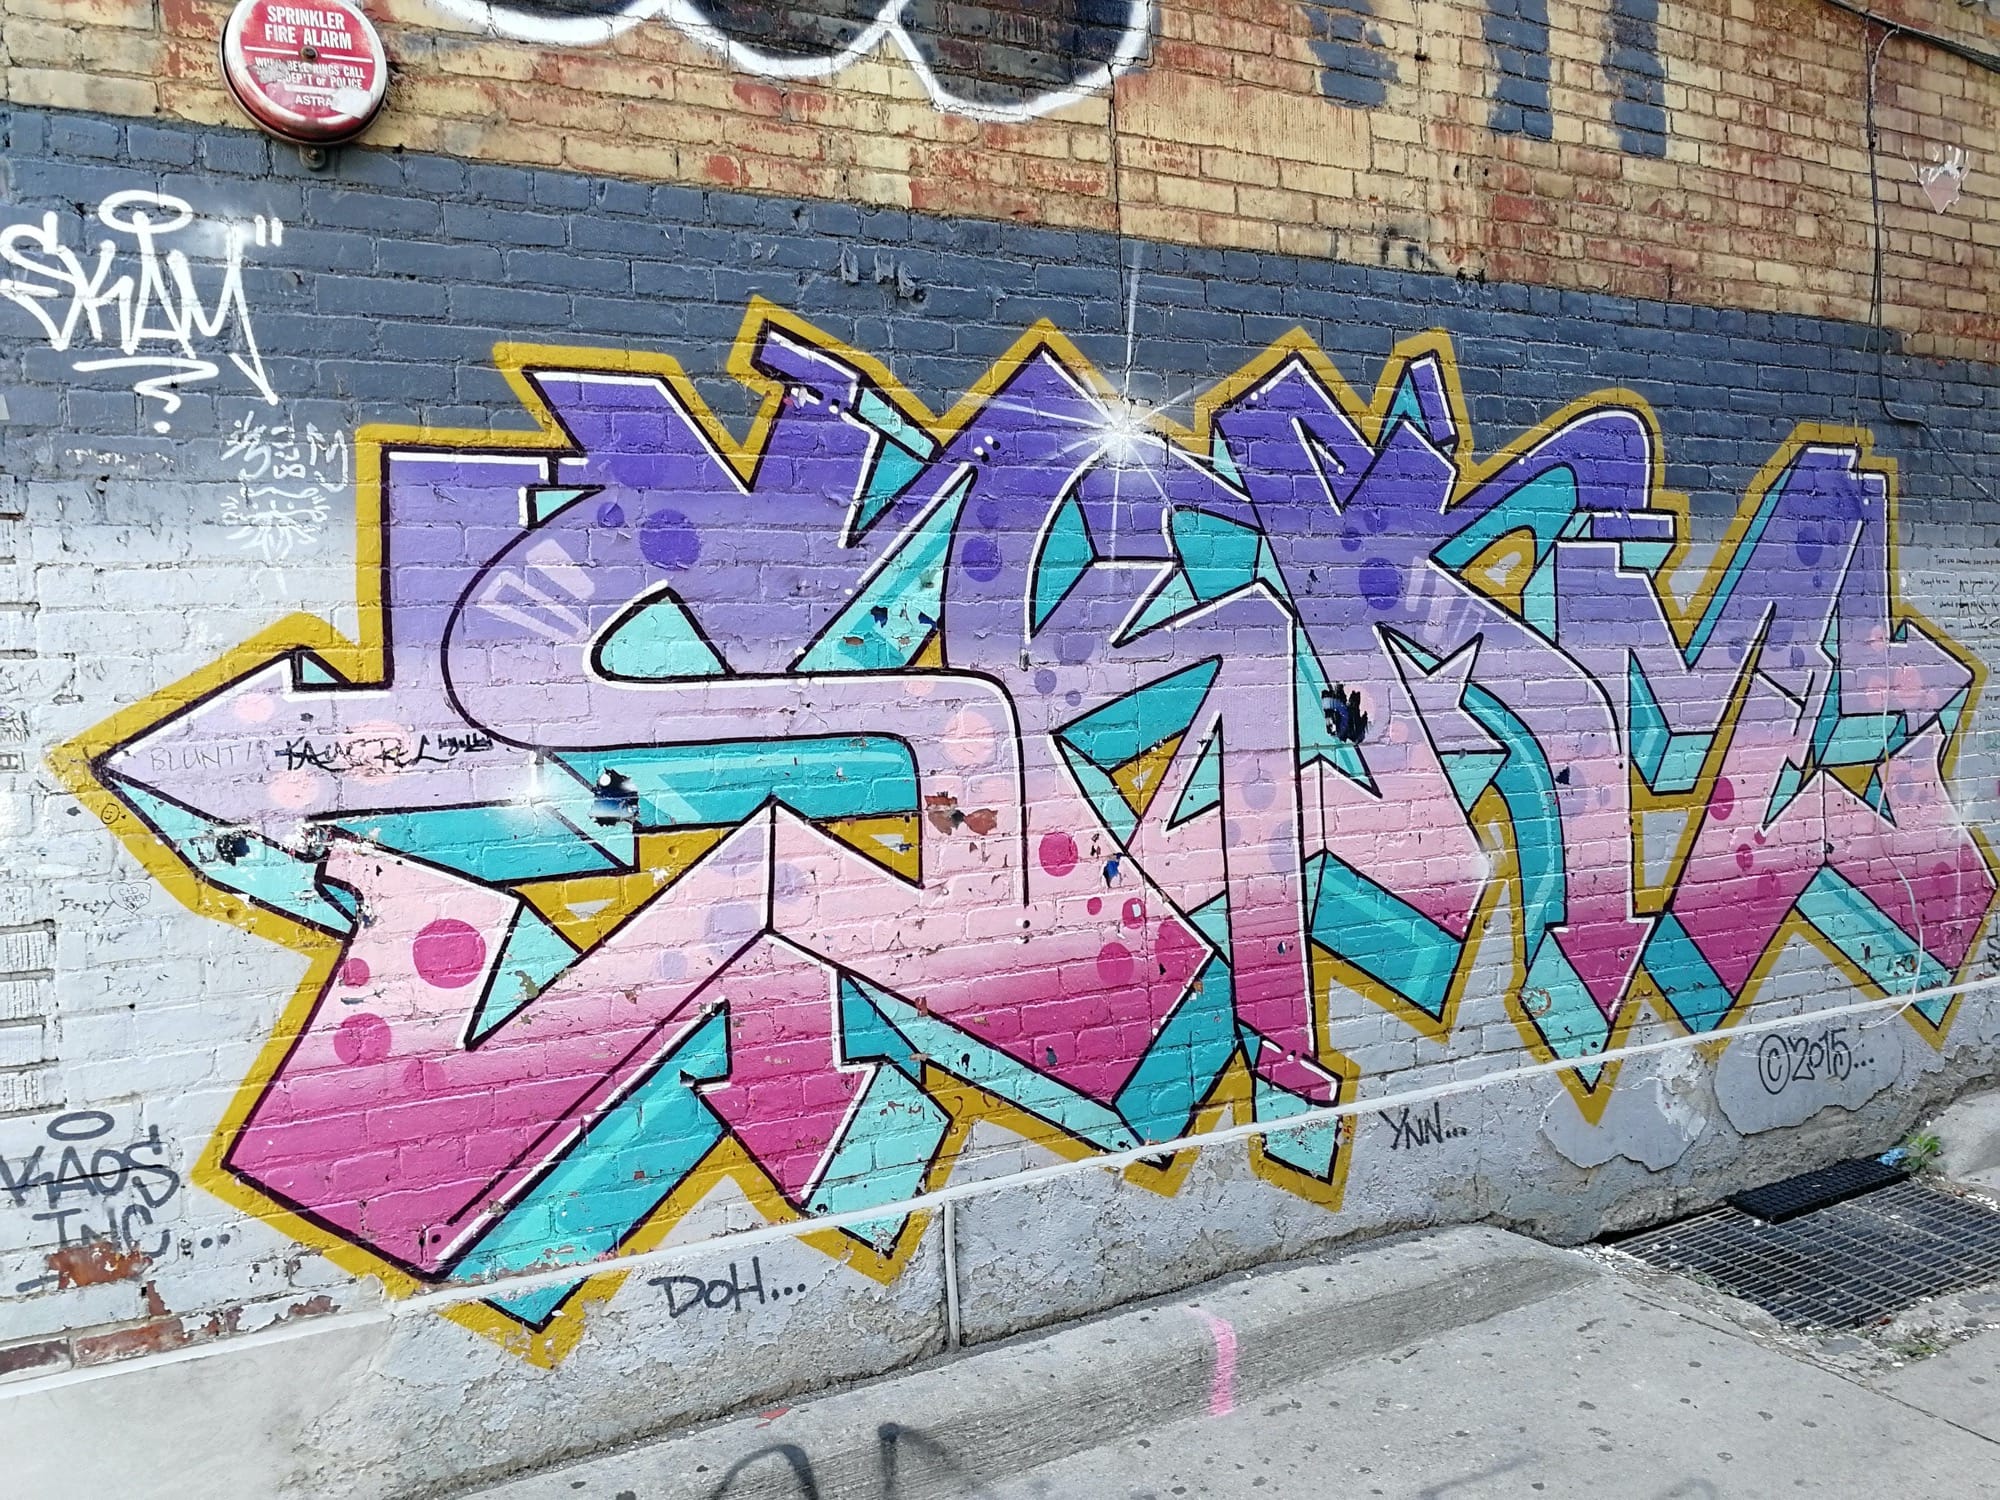 Graffiti 2497  captured by Rabot in Toronto Canada